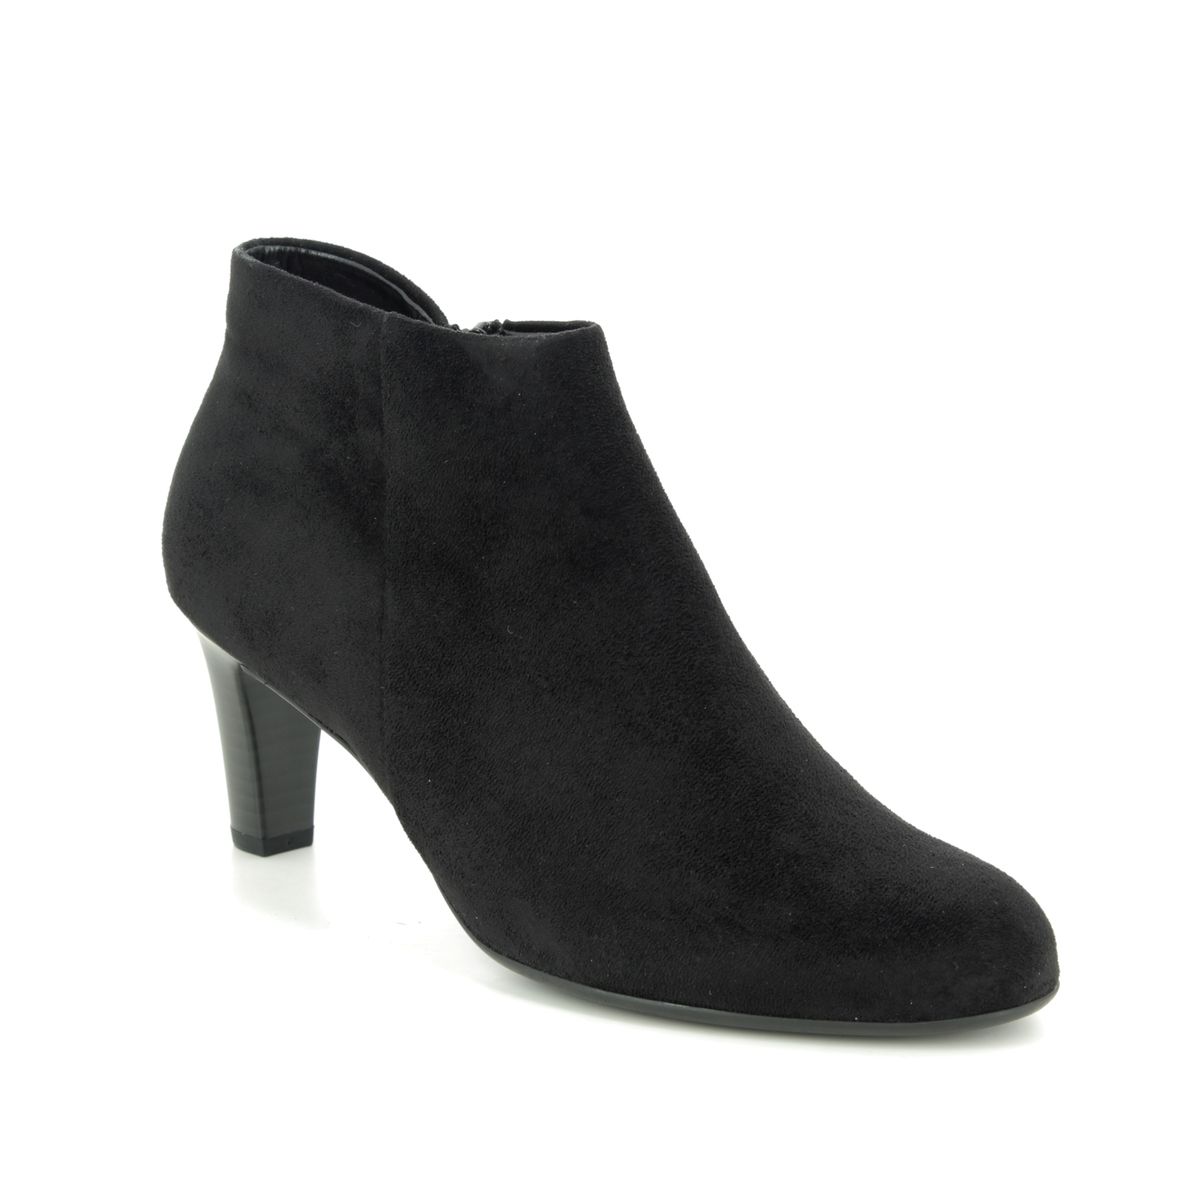 Gabor Fatale 35.850.47 Black ankle boots